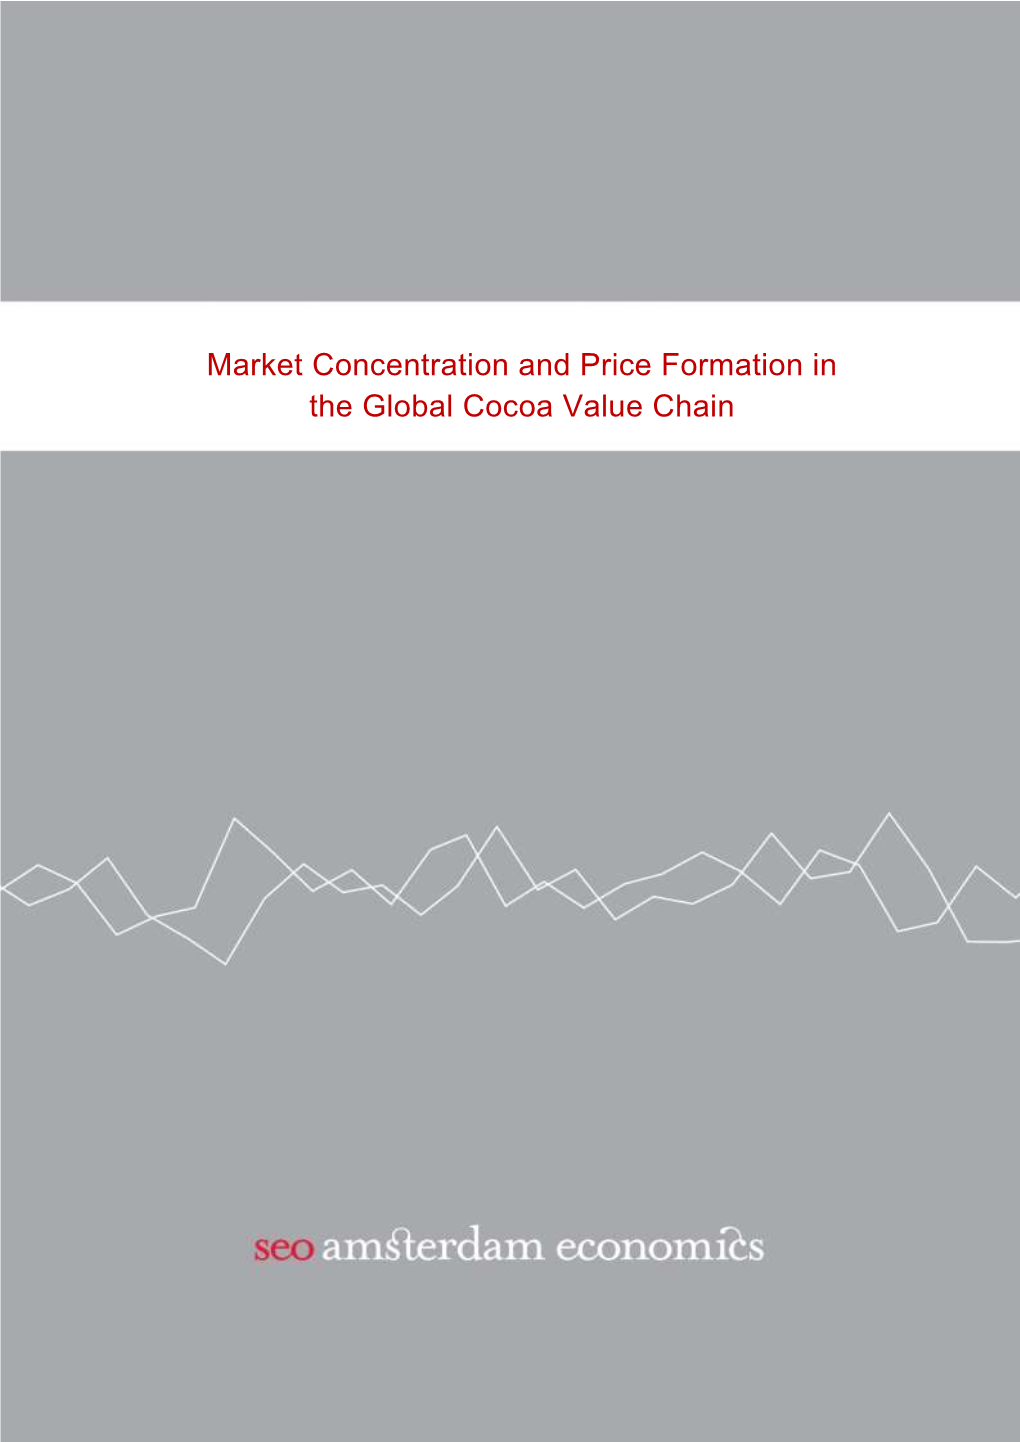 Market Concentration and Price Formation in the Global Cocoa Value Chain